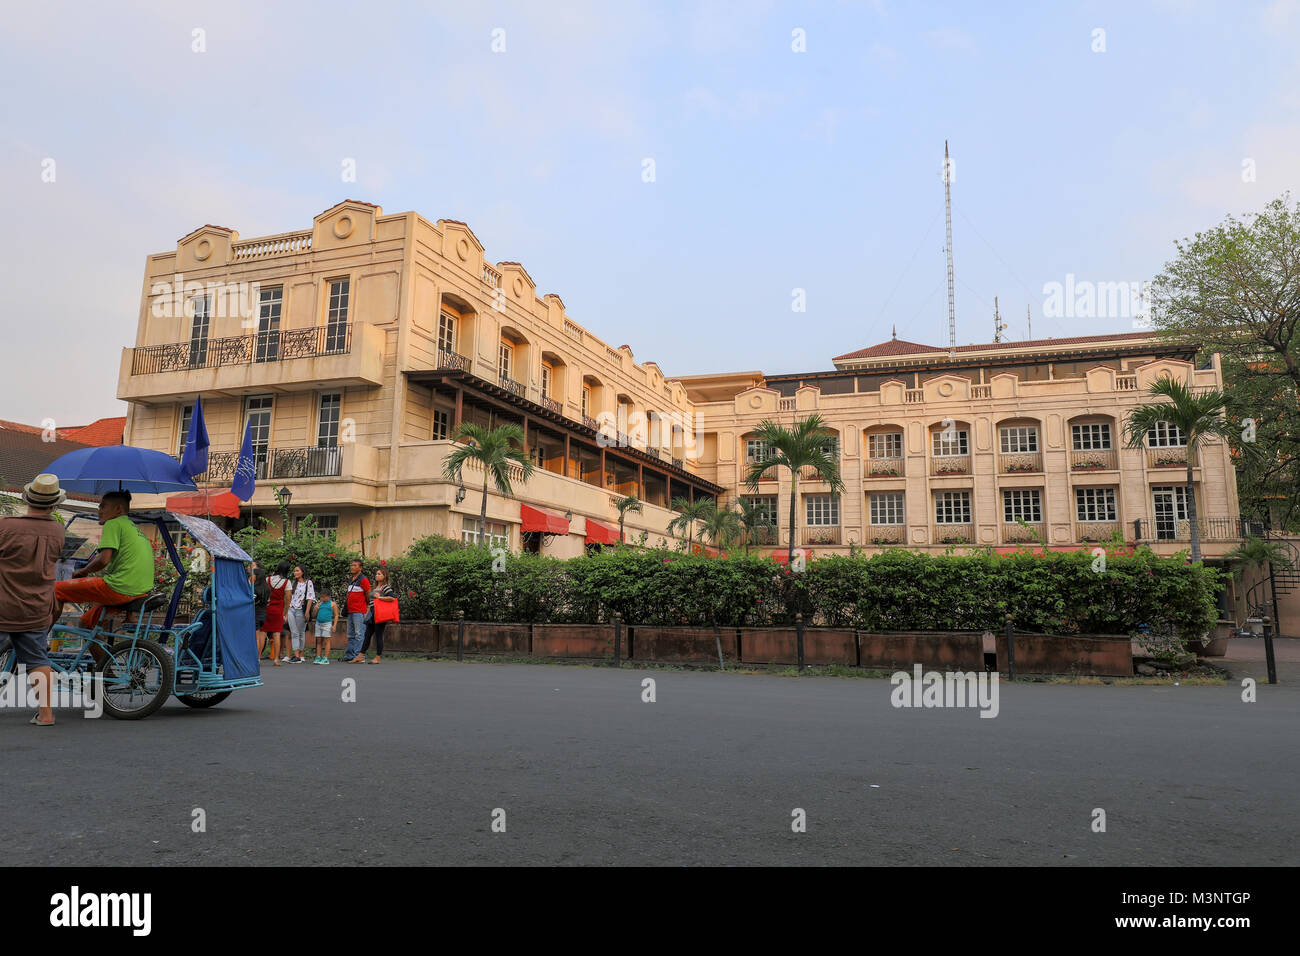 Manila, Philippines - Feb 10, 2018 : Historical building in front of Fort Santiago gate located in the Intramuros district of Manila, Philippines Stock Photo